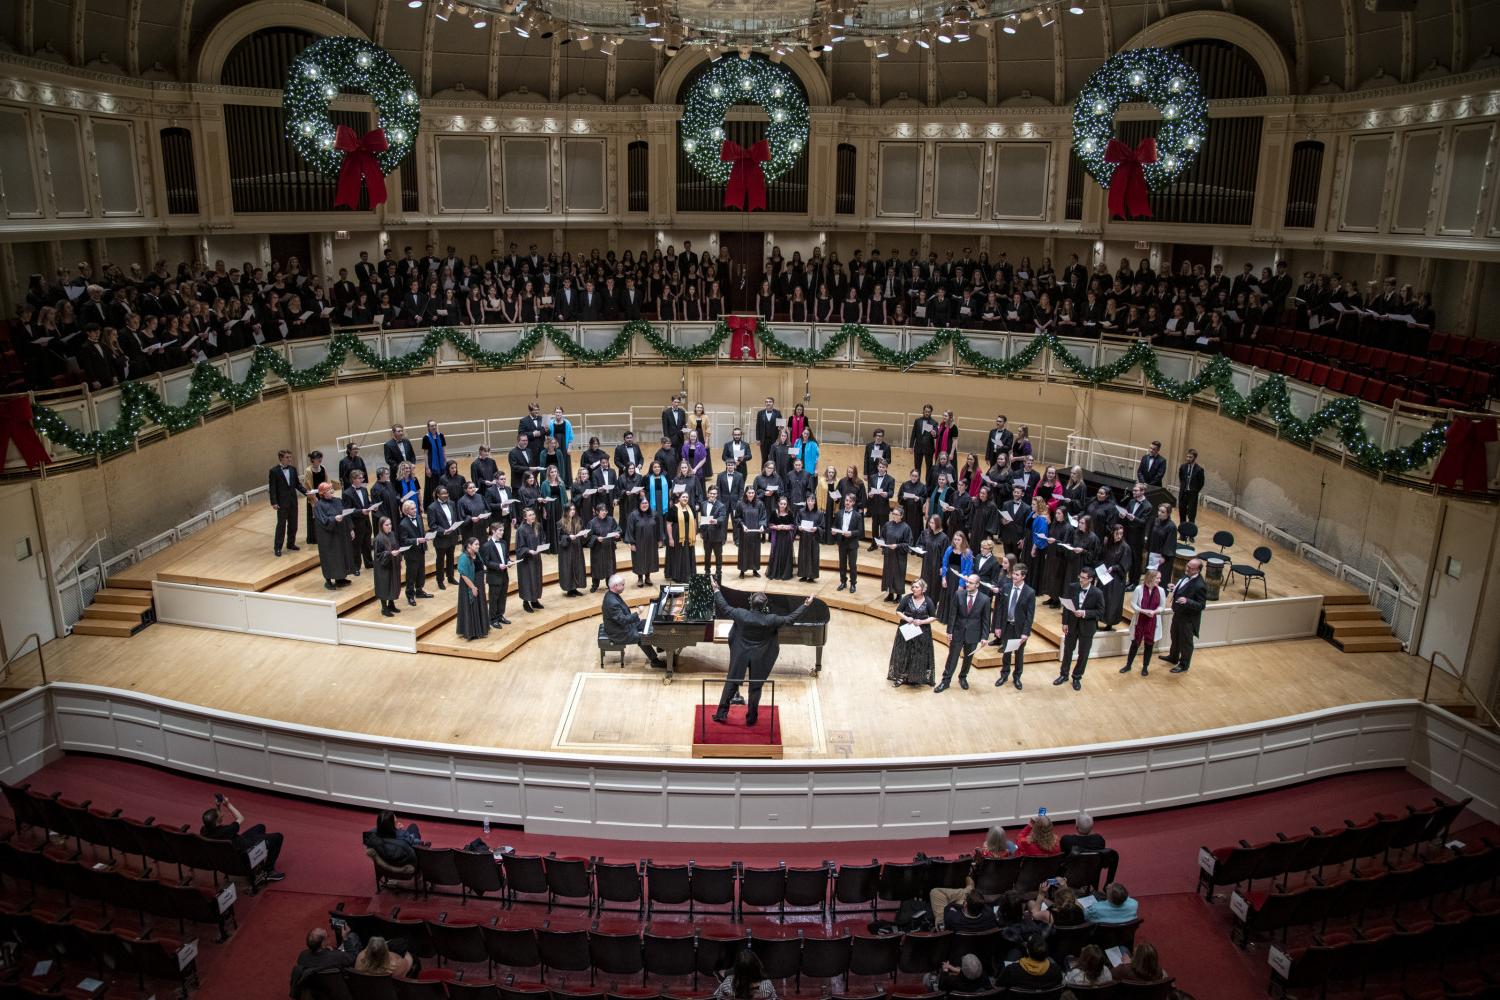 The <a href='http://w2.awamiwebsite.com'>bv伟德ios下载</a> Choir performs in the Chicago Symphony Hall.